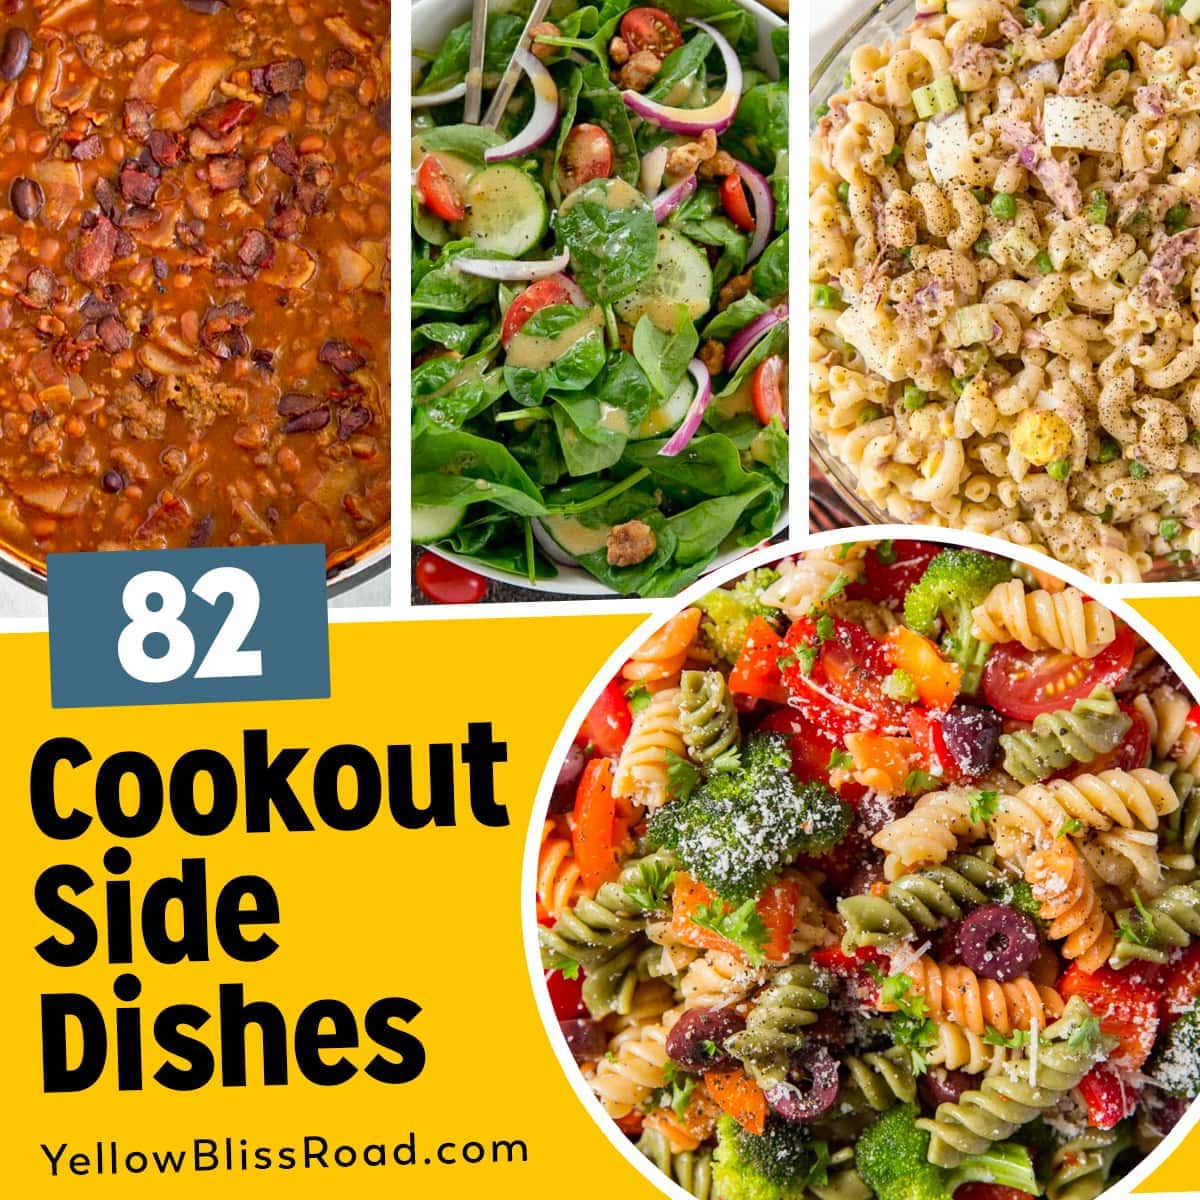 82 Cookout Side Dishes for Summer